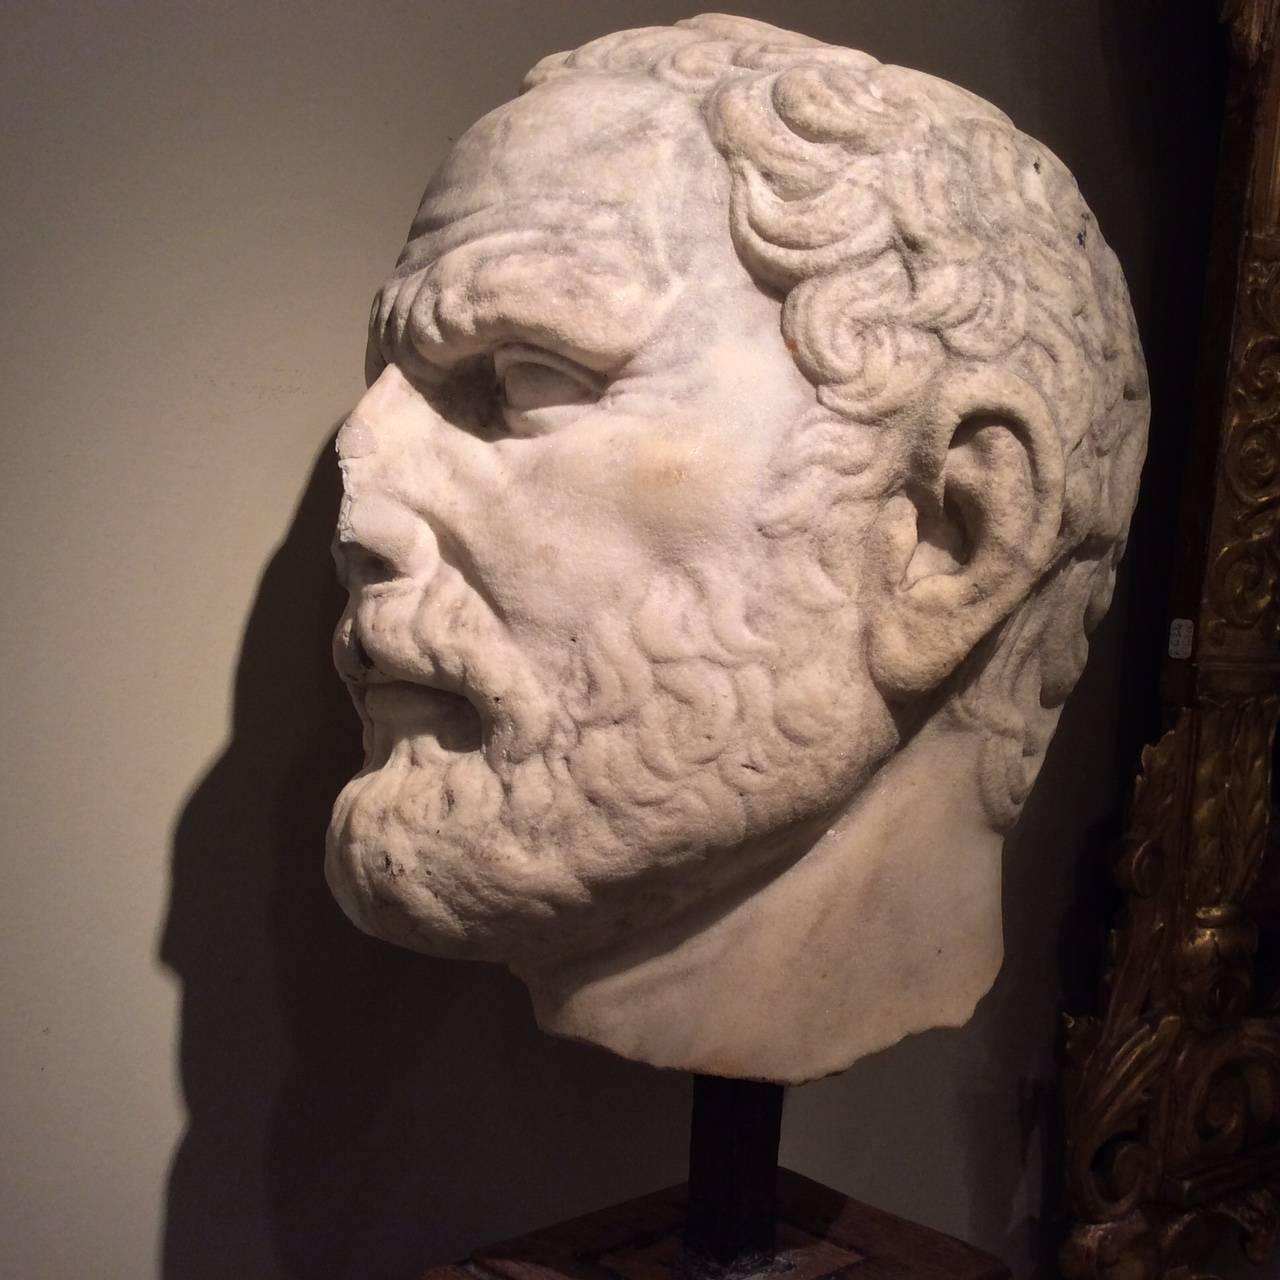 Hand-Carved Marble Head, Doubtfully Demosthenes , Italian Work , 16th or 17th Century